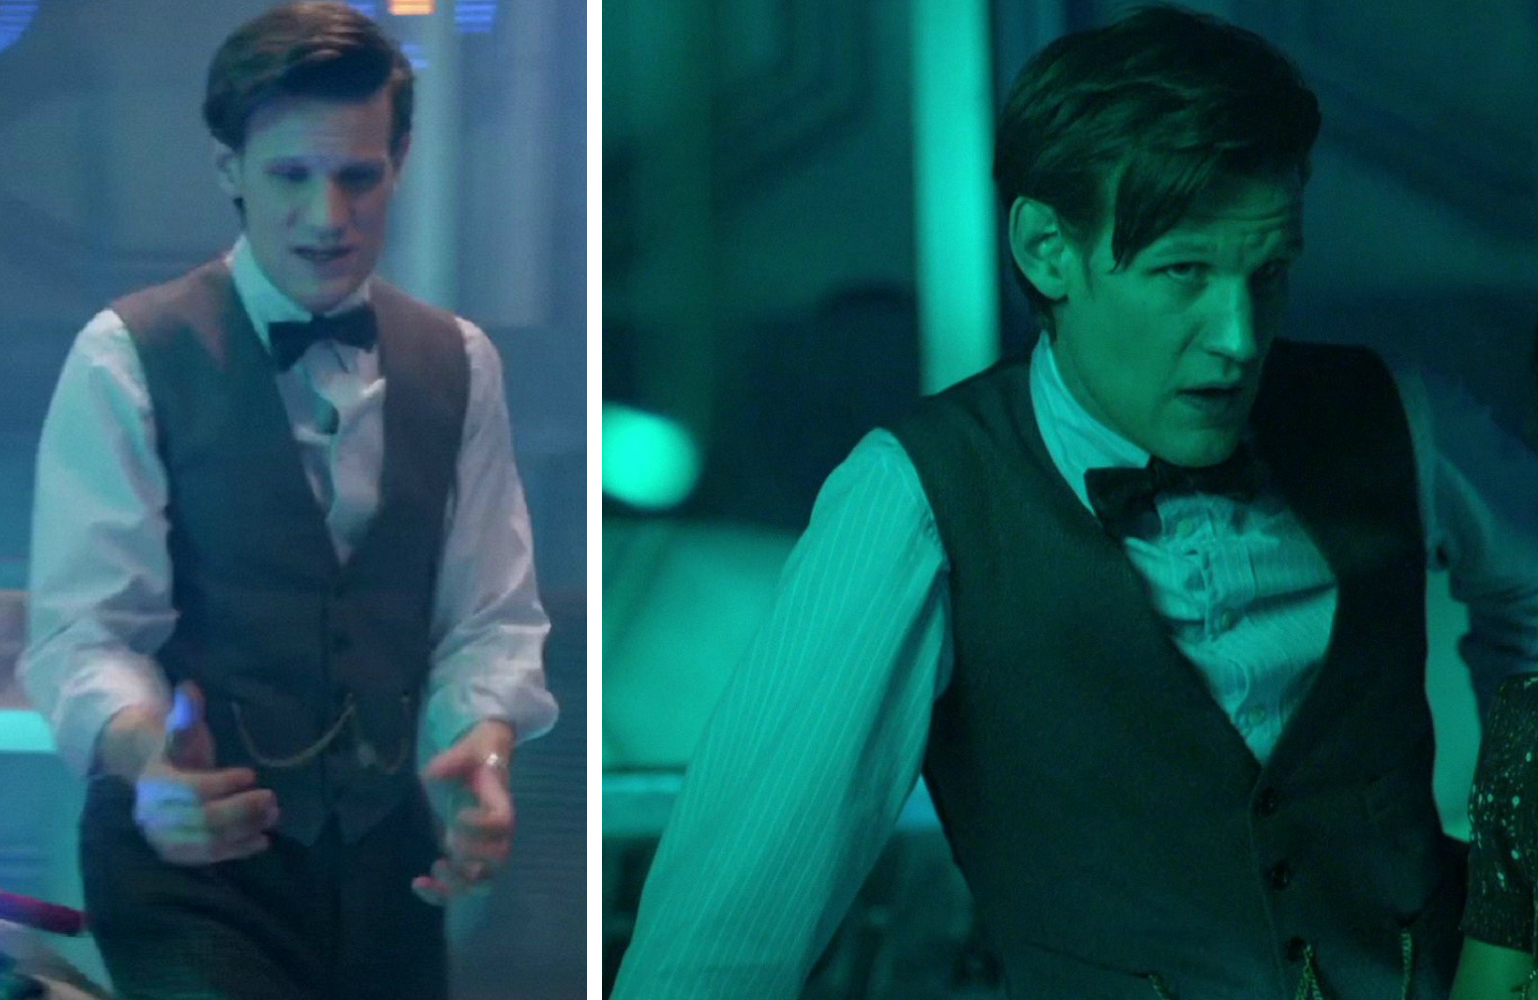 11th Doctor "scales" waistcoat analysis